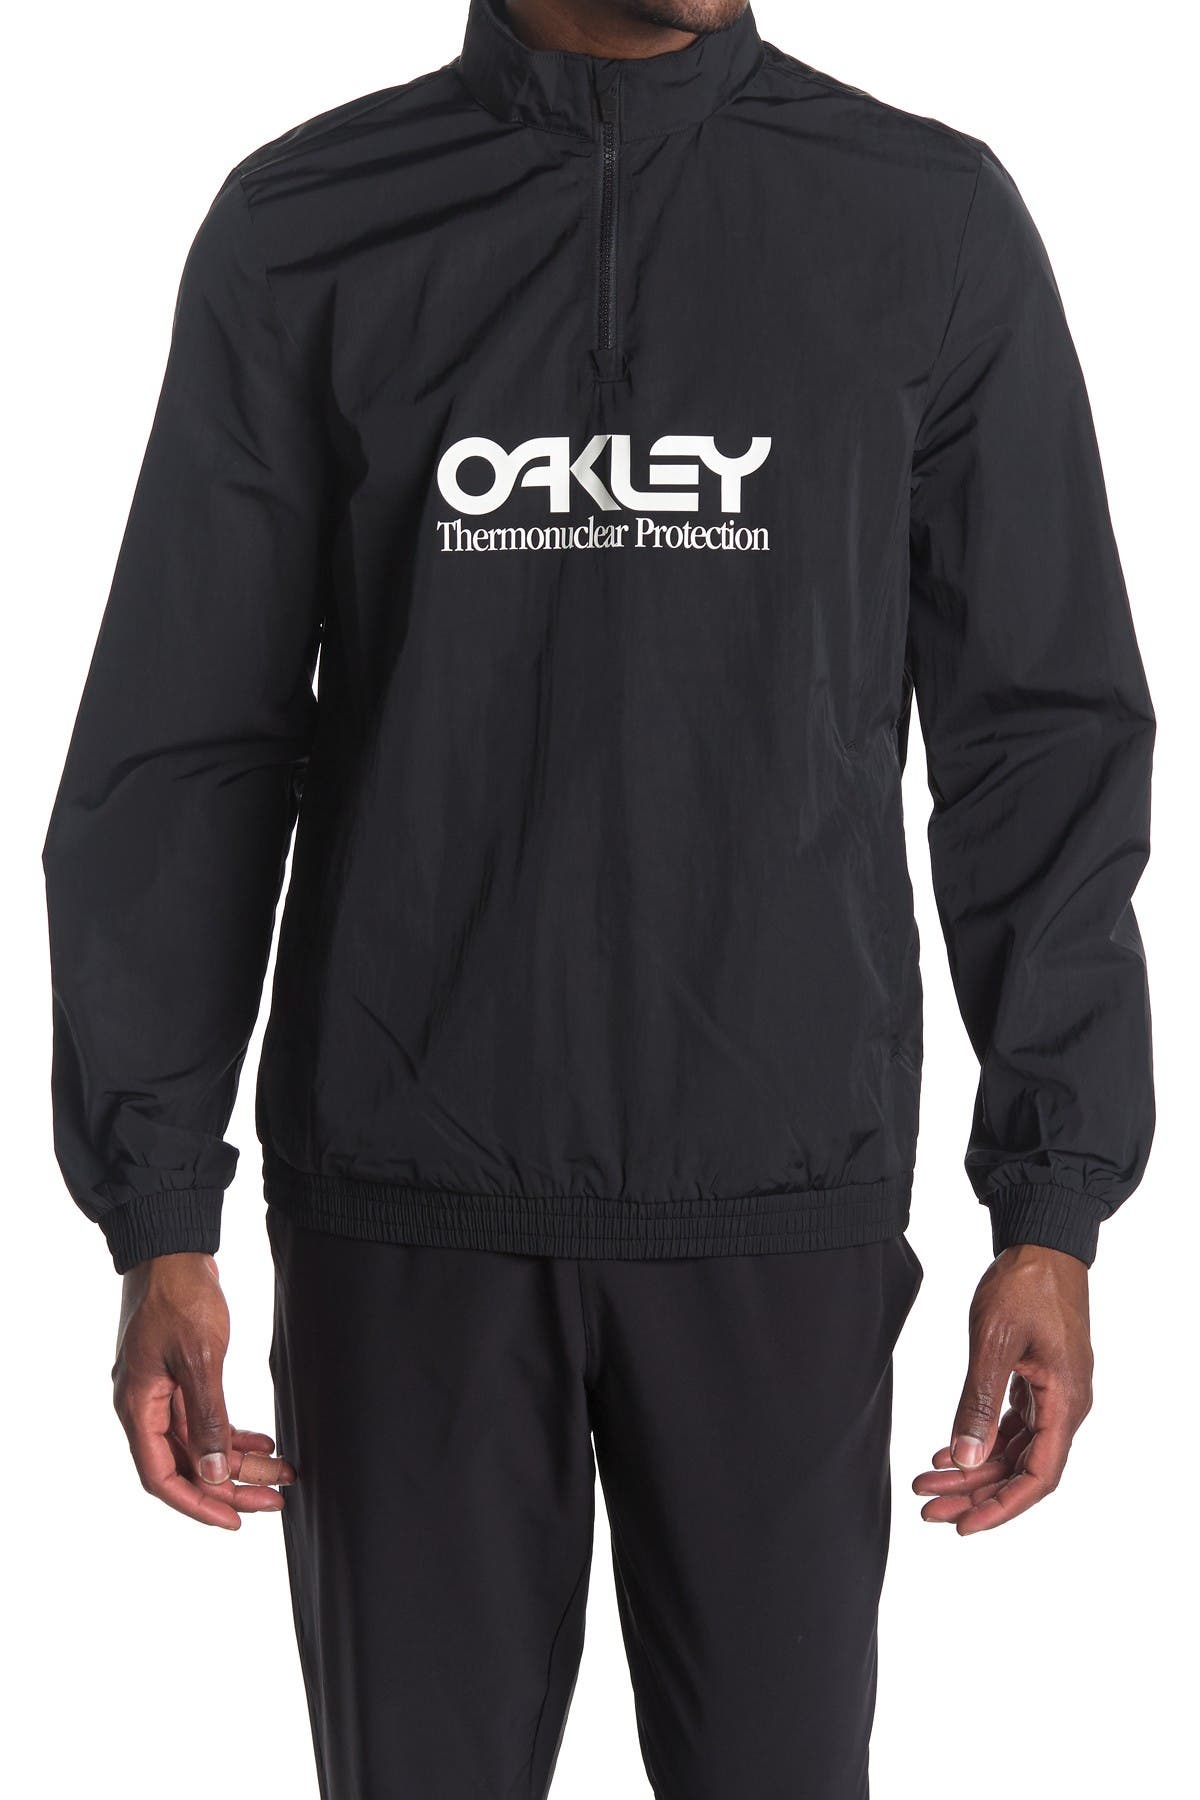 Oakley | Thermonuclear Protection Half 